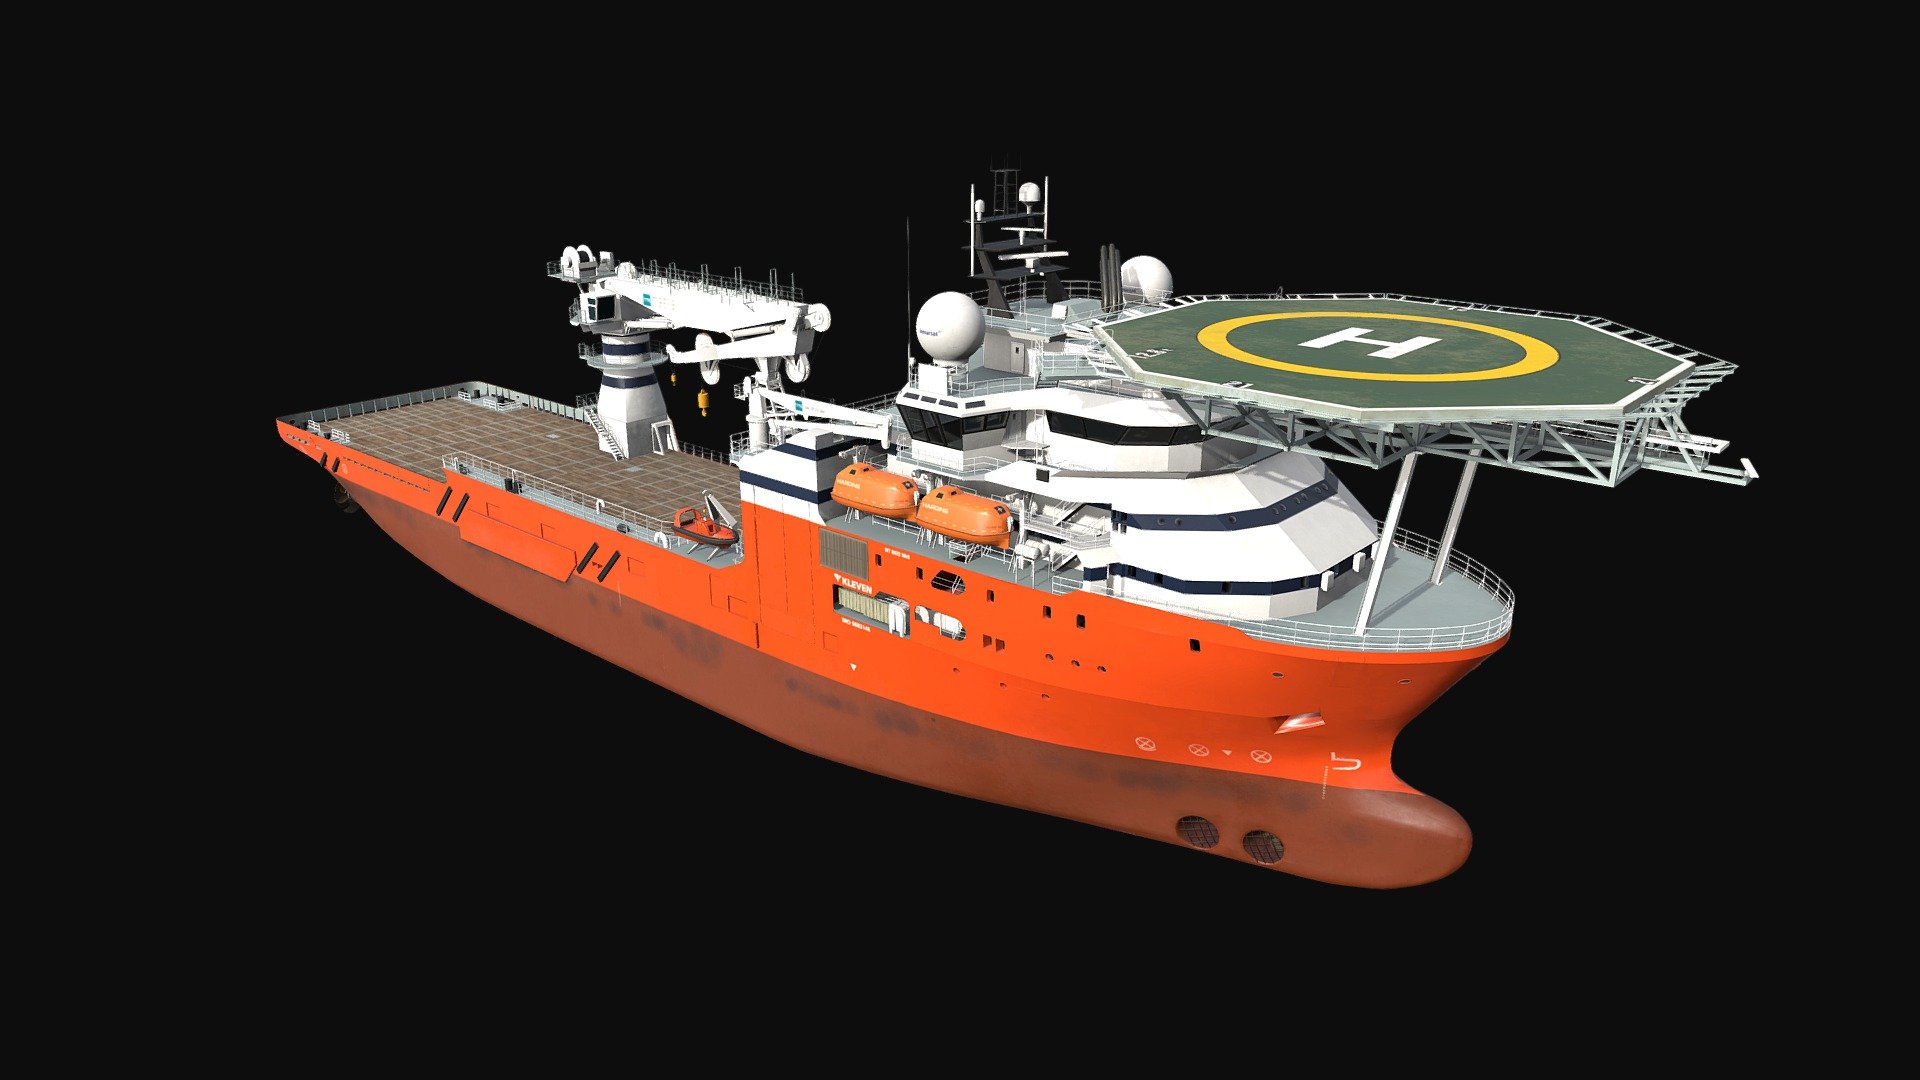 The Seabed Constructor is a modern and versatile Subsea Support and Construction vessel of the MT 6022 MKII design. She is fitted with two heavy duty work class ROV systems and a 250 t Active Heave Compensated offshore crane, enabling her to conduct ultra-deep water operations down to 6000 msw. This dynamically positioned vessel was built to undertake a variety of operations, including IMR, survey and decommissioning 3d model